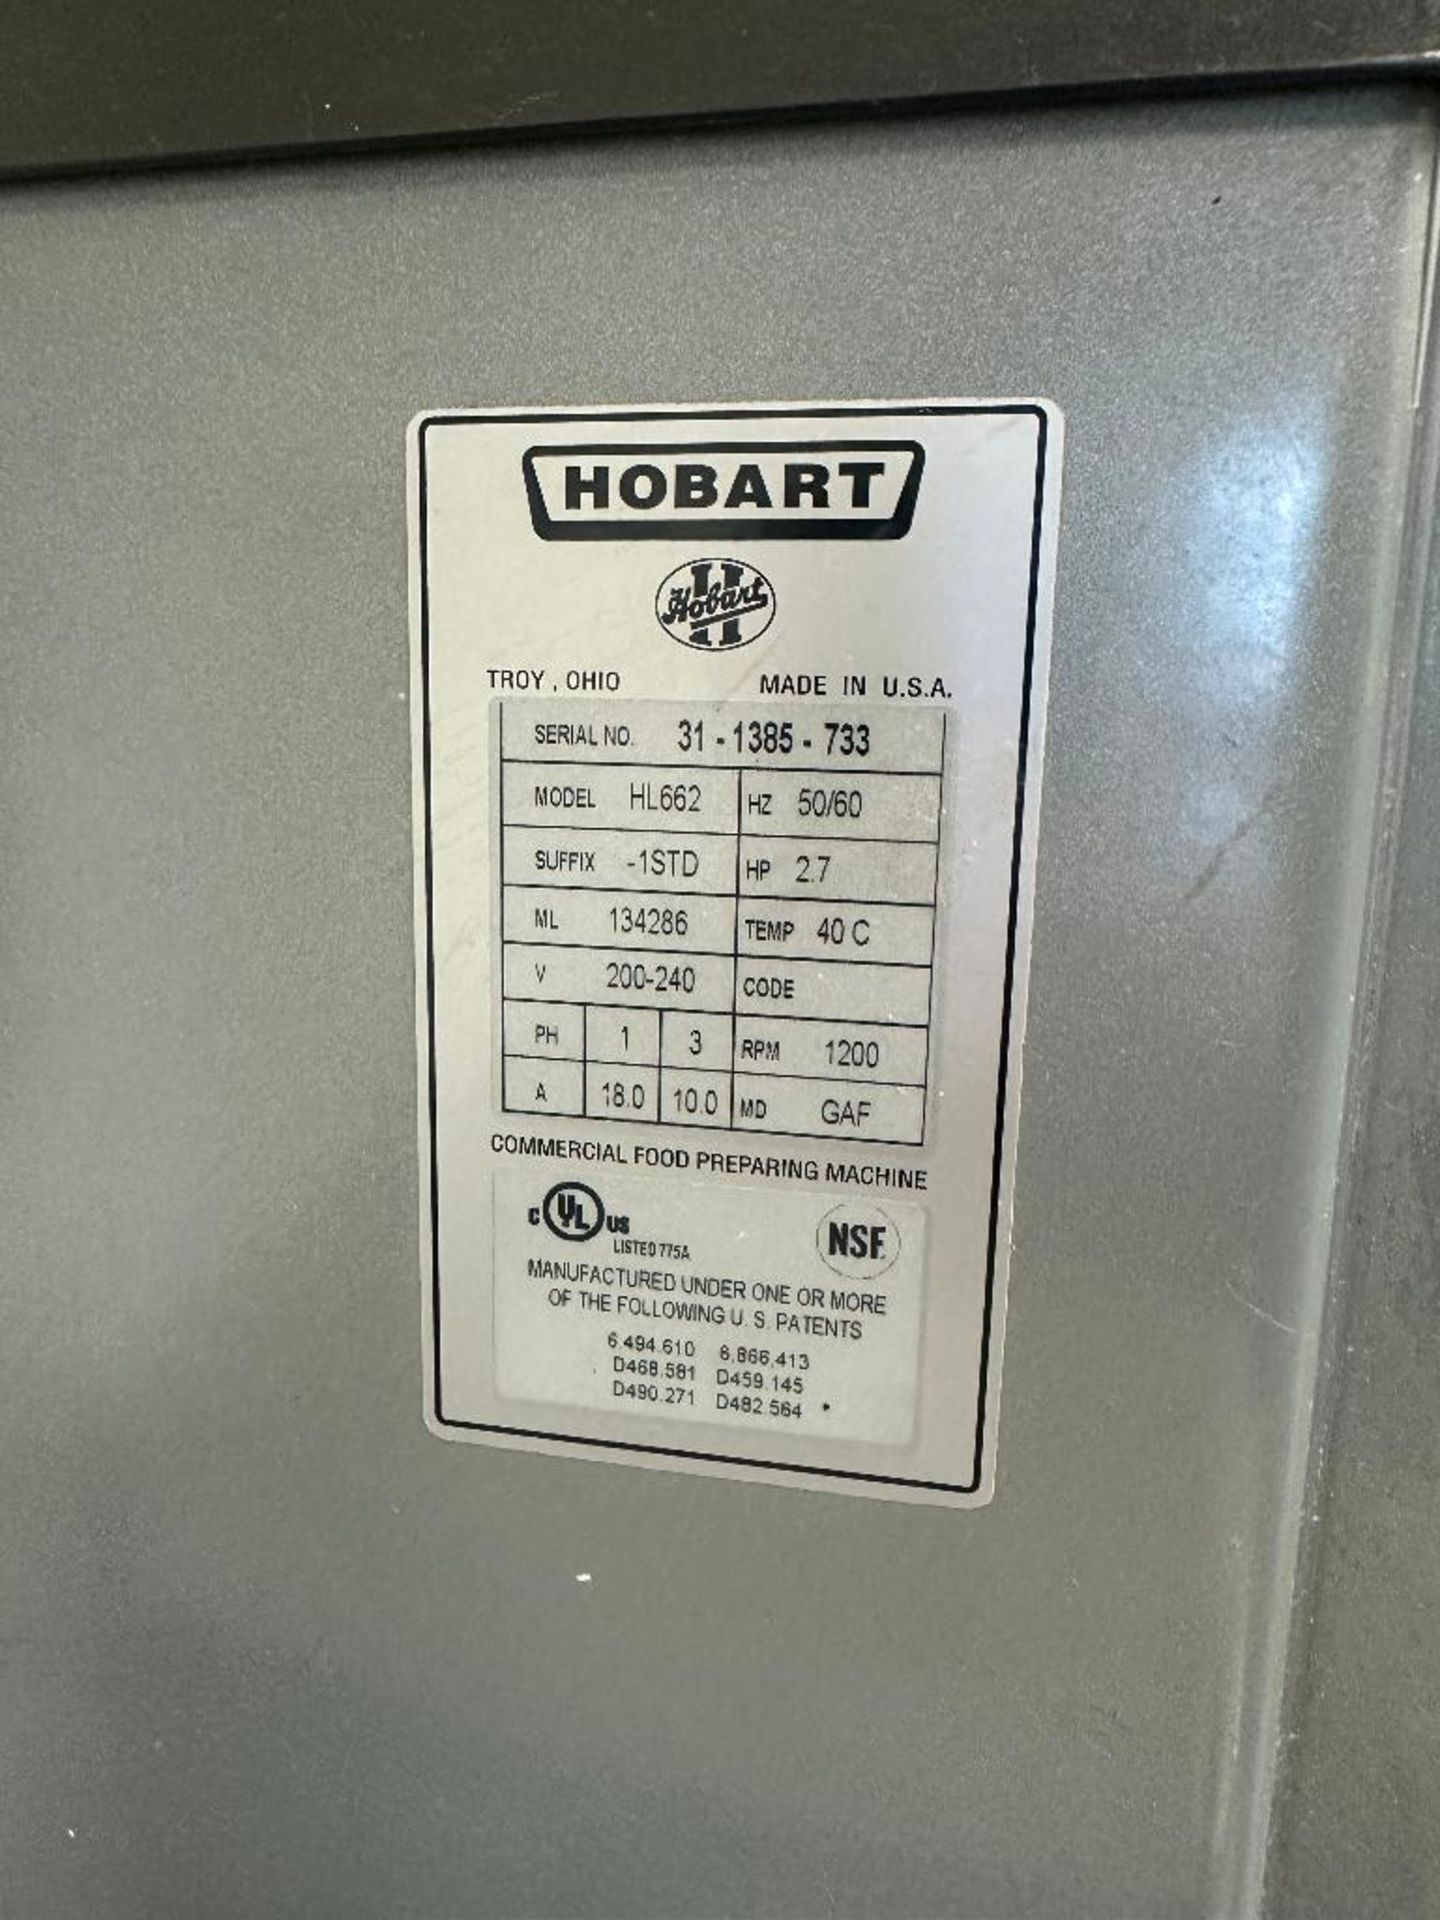 DESCRIPTION HOBART 60 QT LEGACY MIXER W/ BOWL,, PADDLE, AND HOOK. RETAIL NEW FOR $26K. NO BOWL WITH - Image 5 of 5